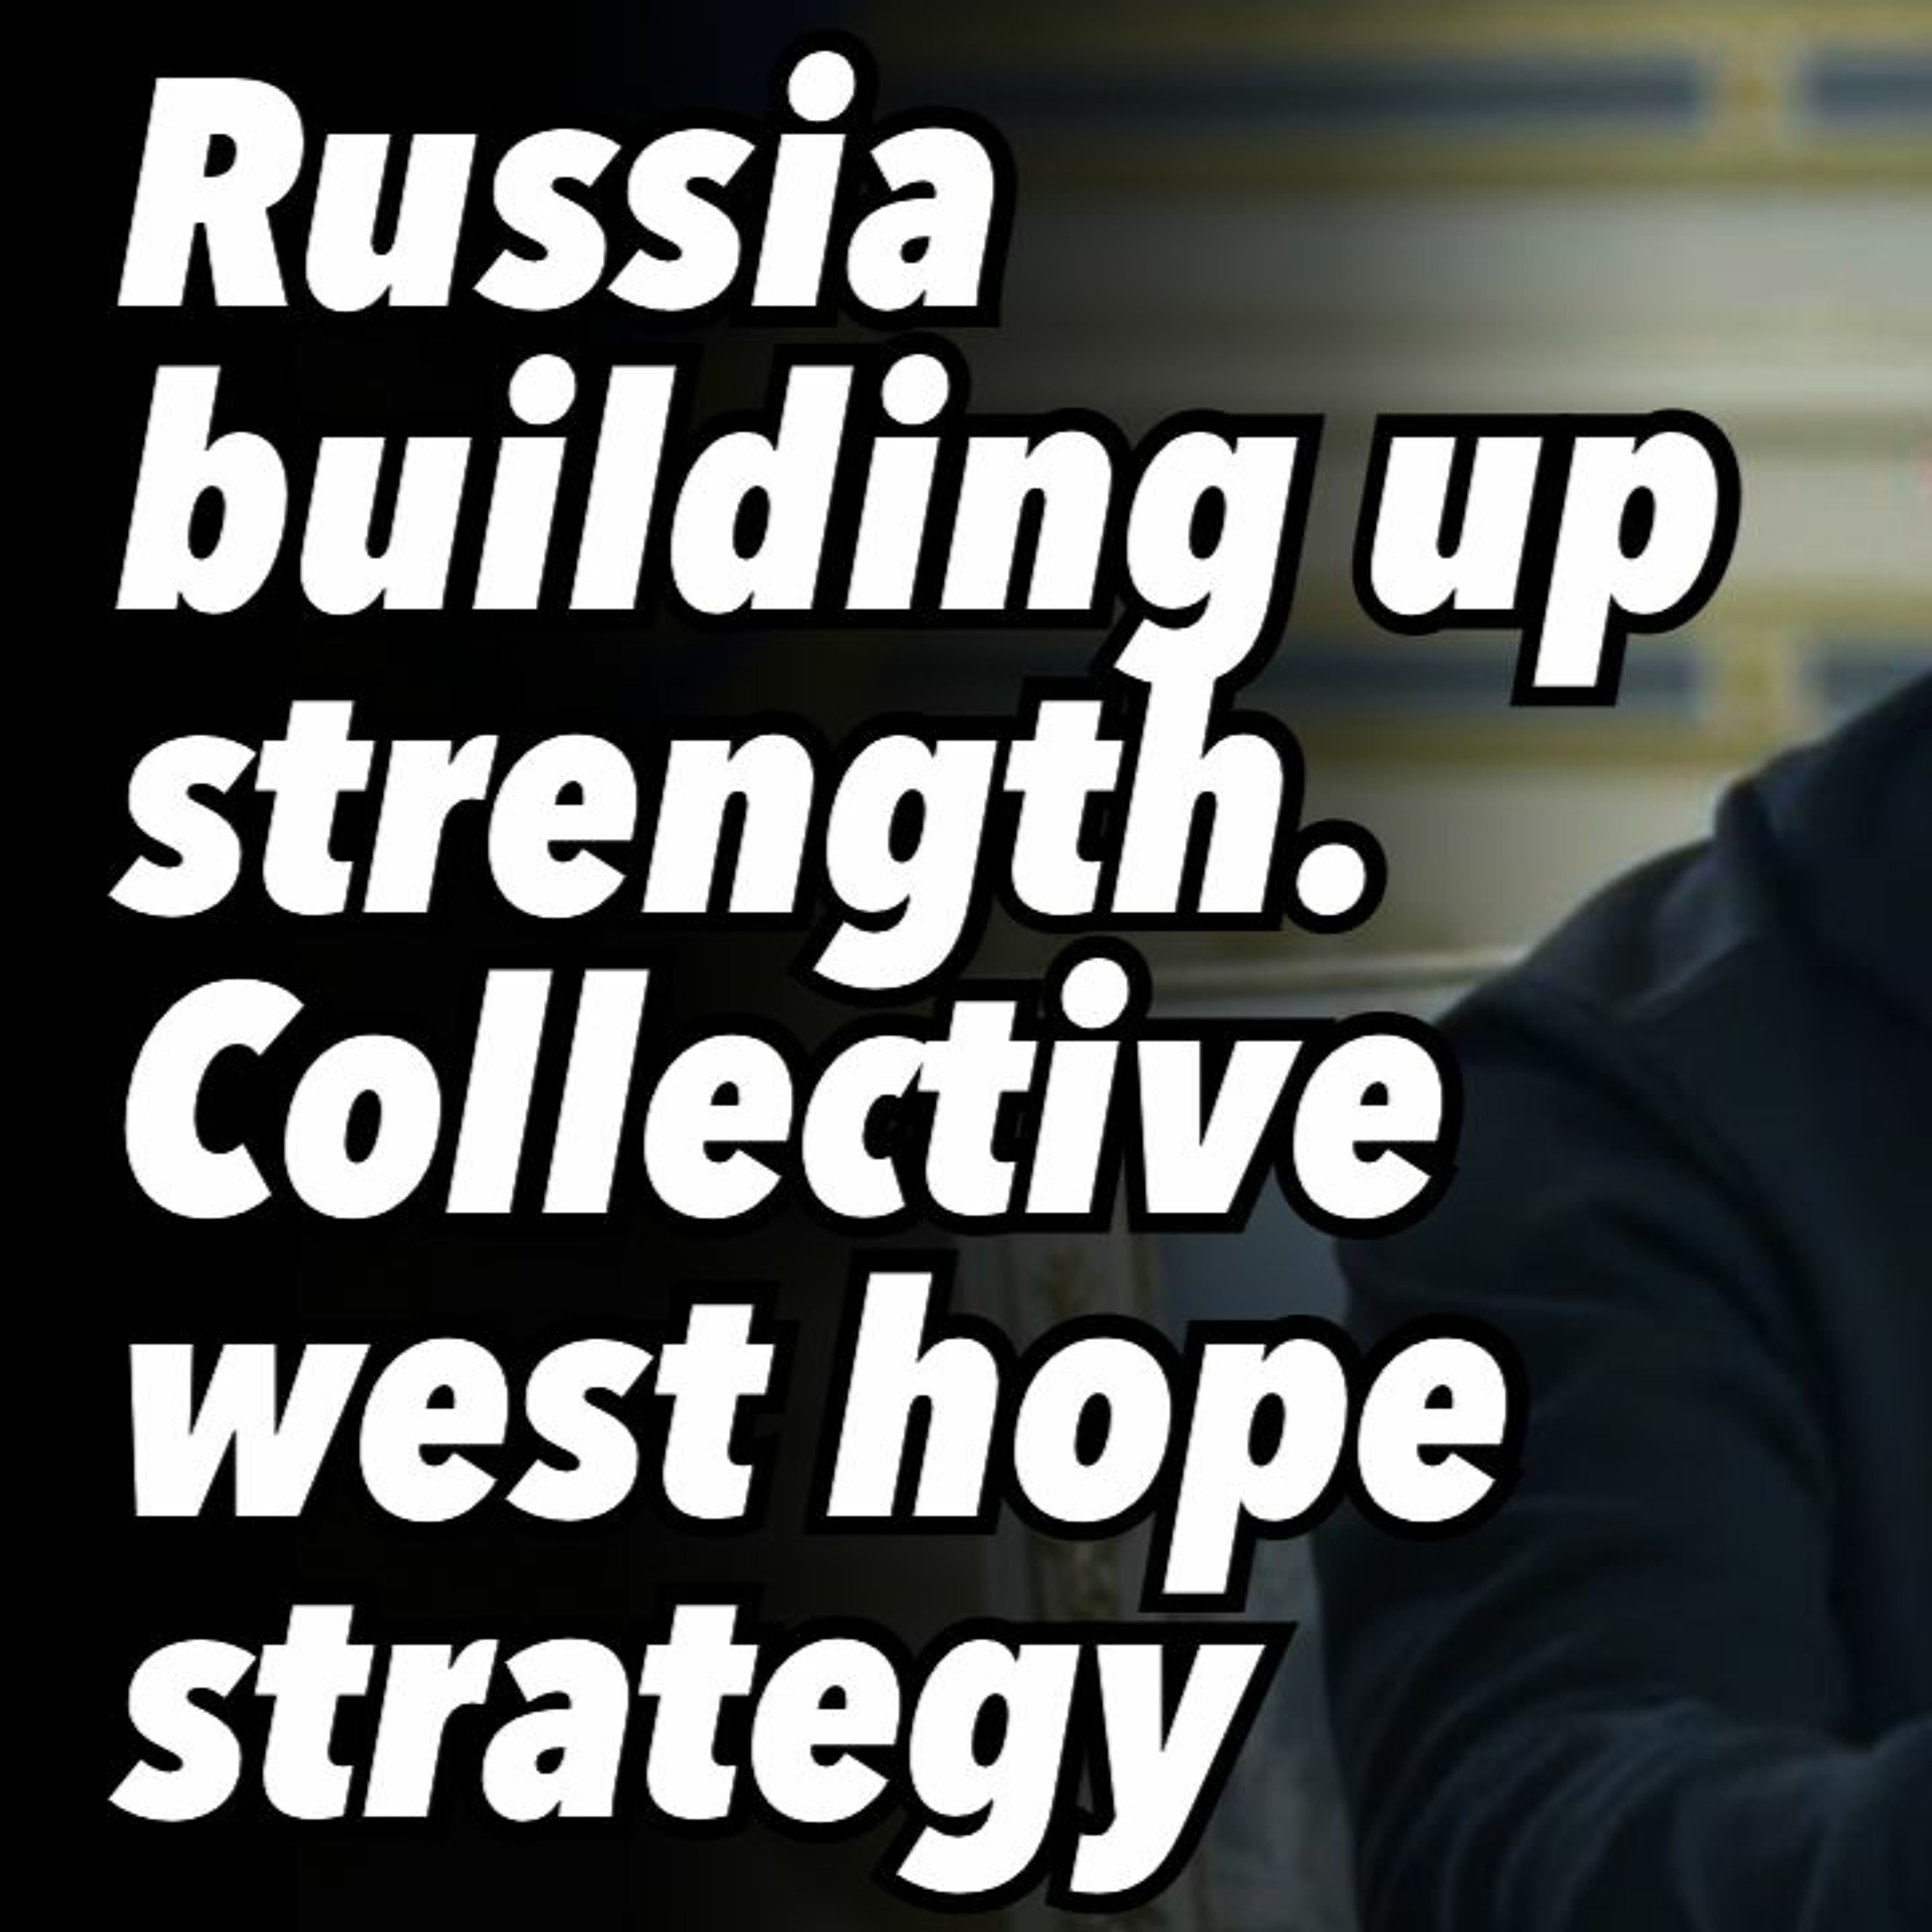 Russia building up strength. Collective West hope strategy